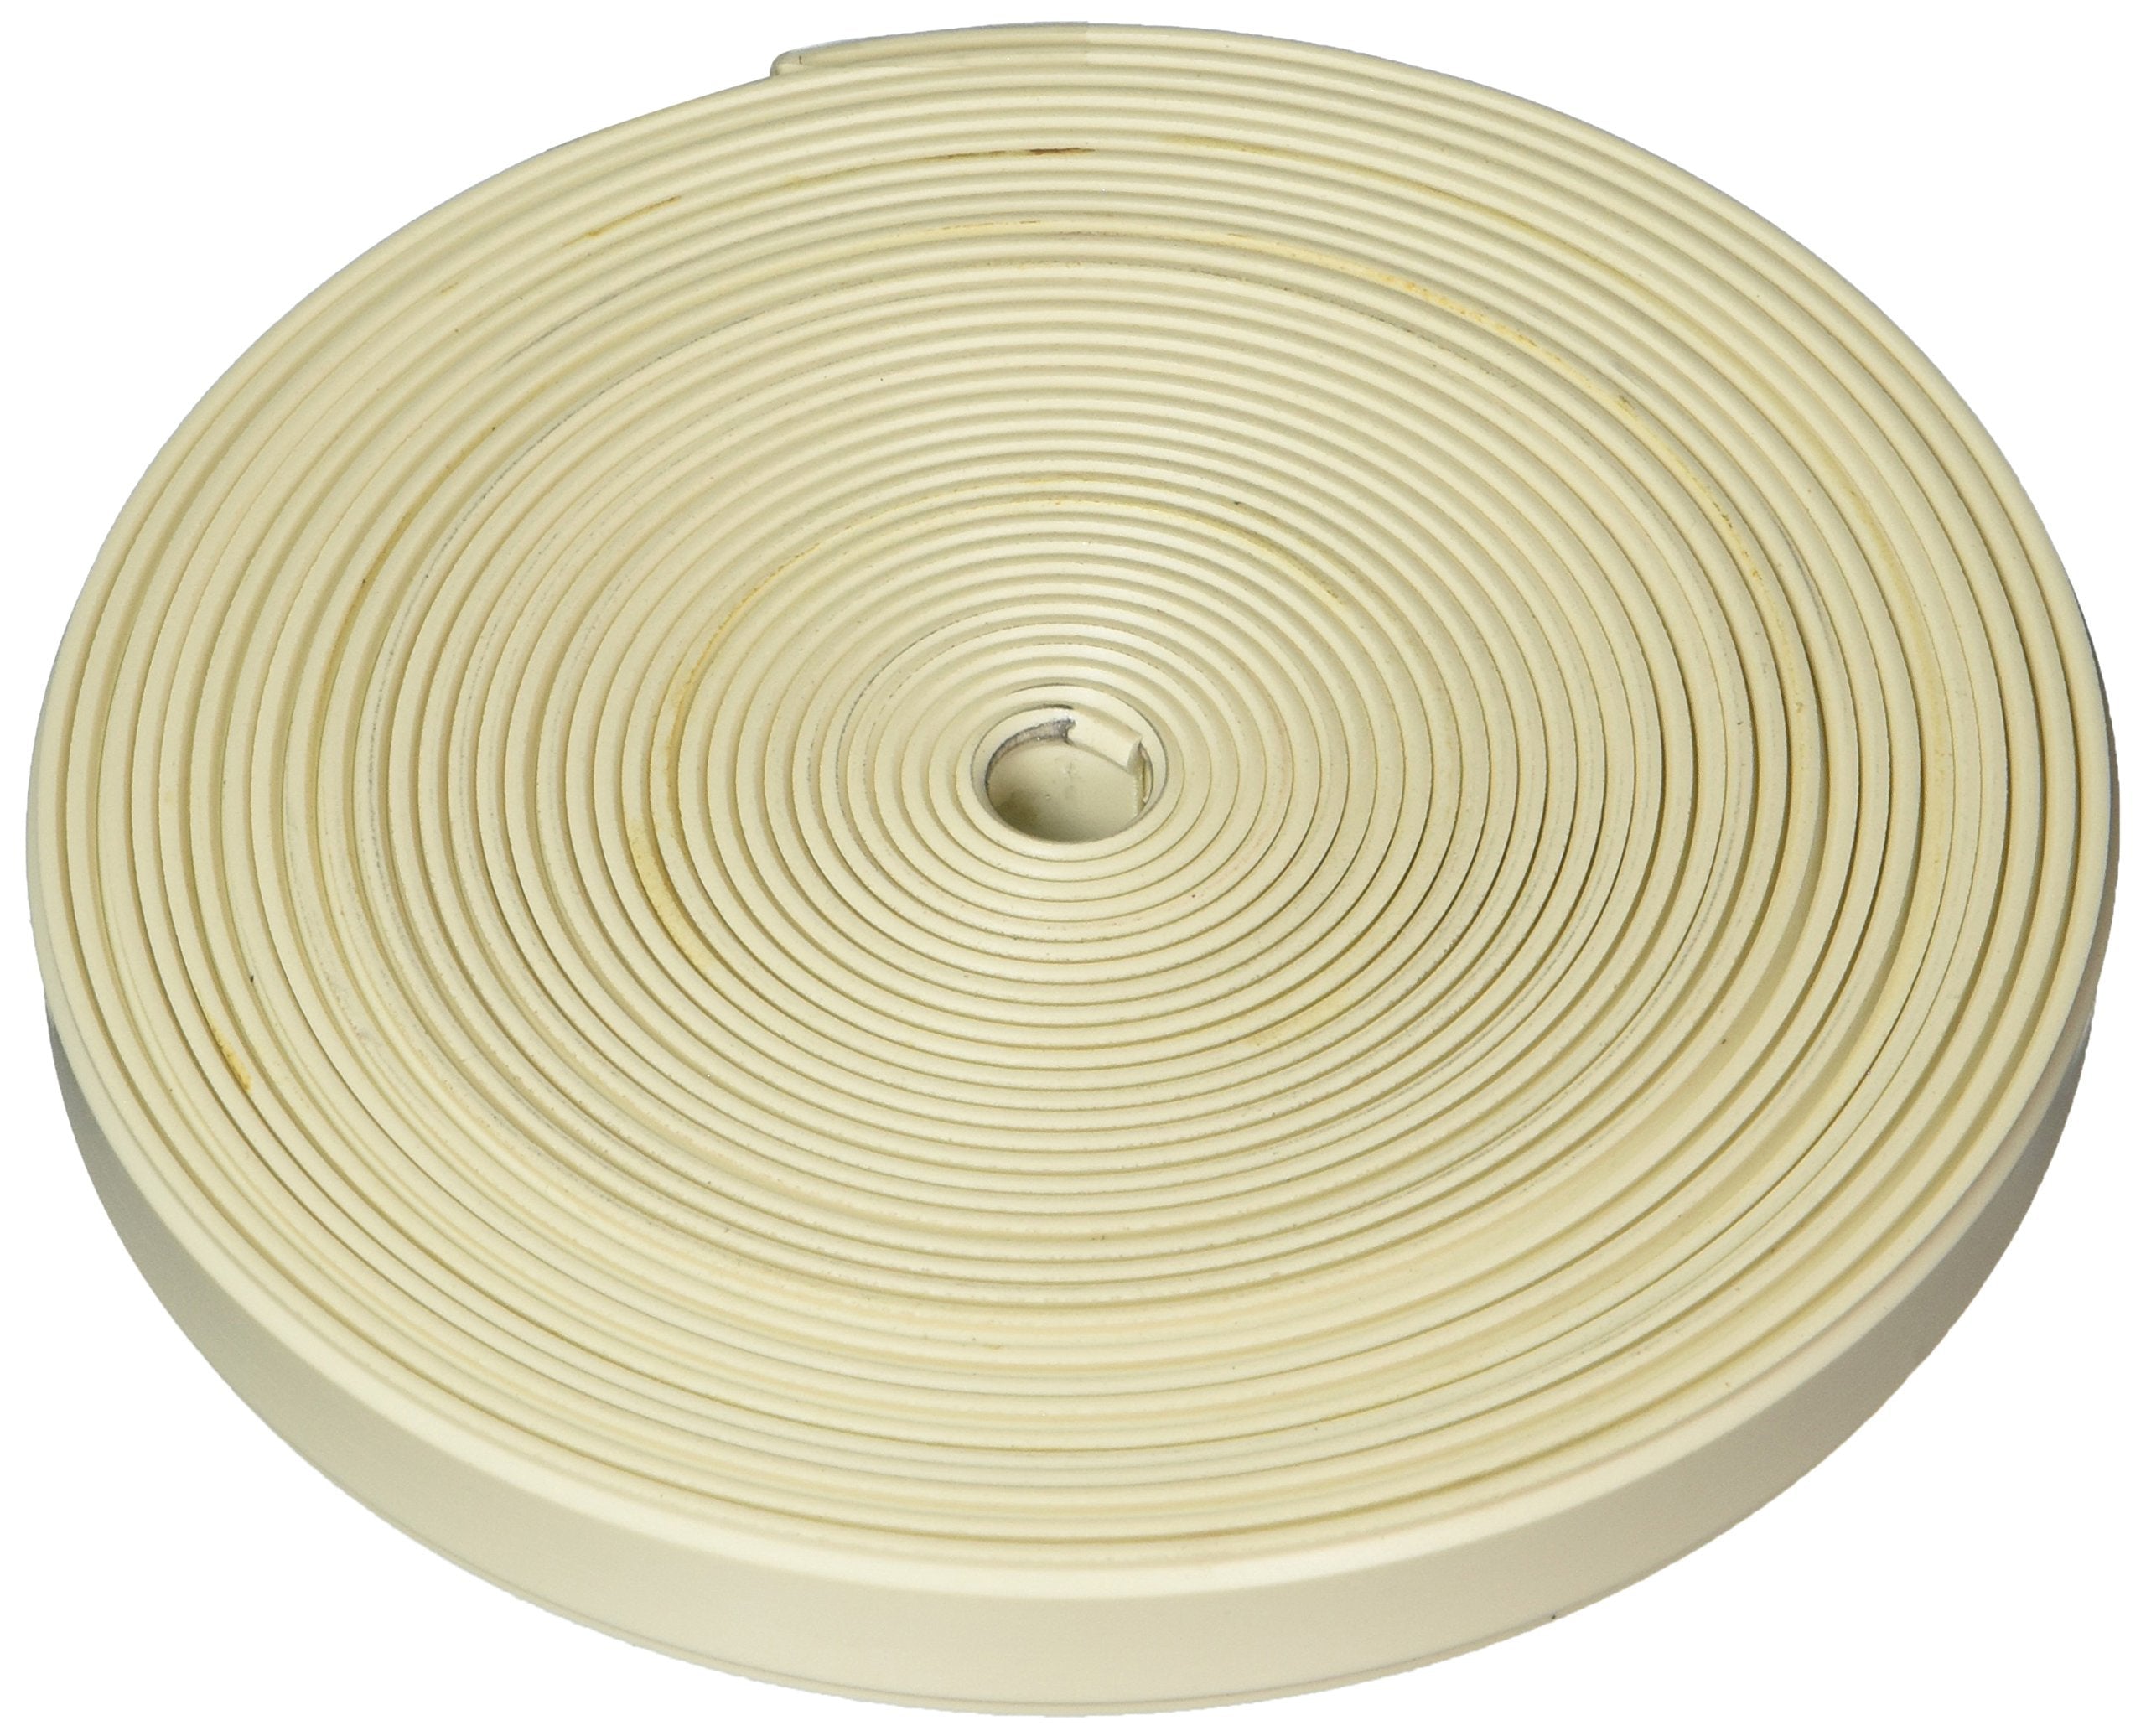 AP Products 011-368 Colonial White 3/4" x 25' Flexible Insert Trim